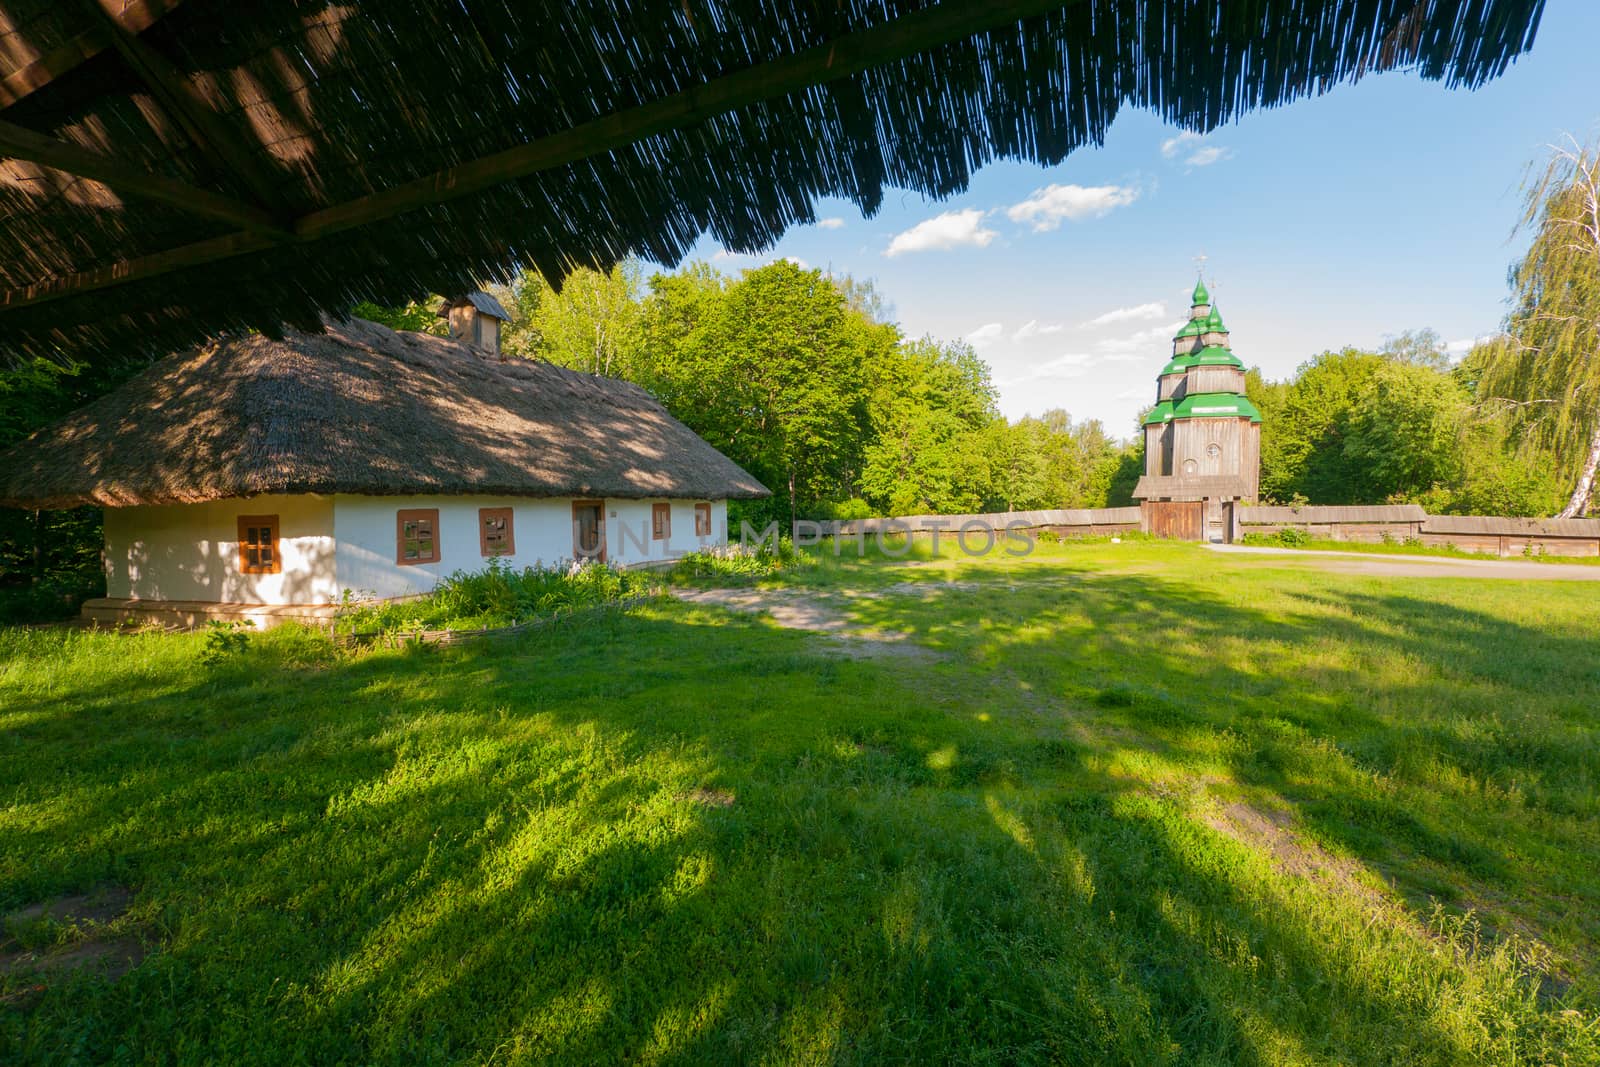 A large old Ukrainian hut on the background of a wooden church in the distance